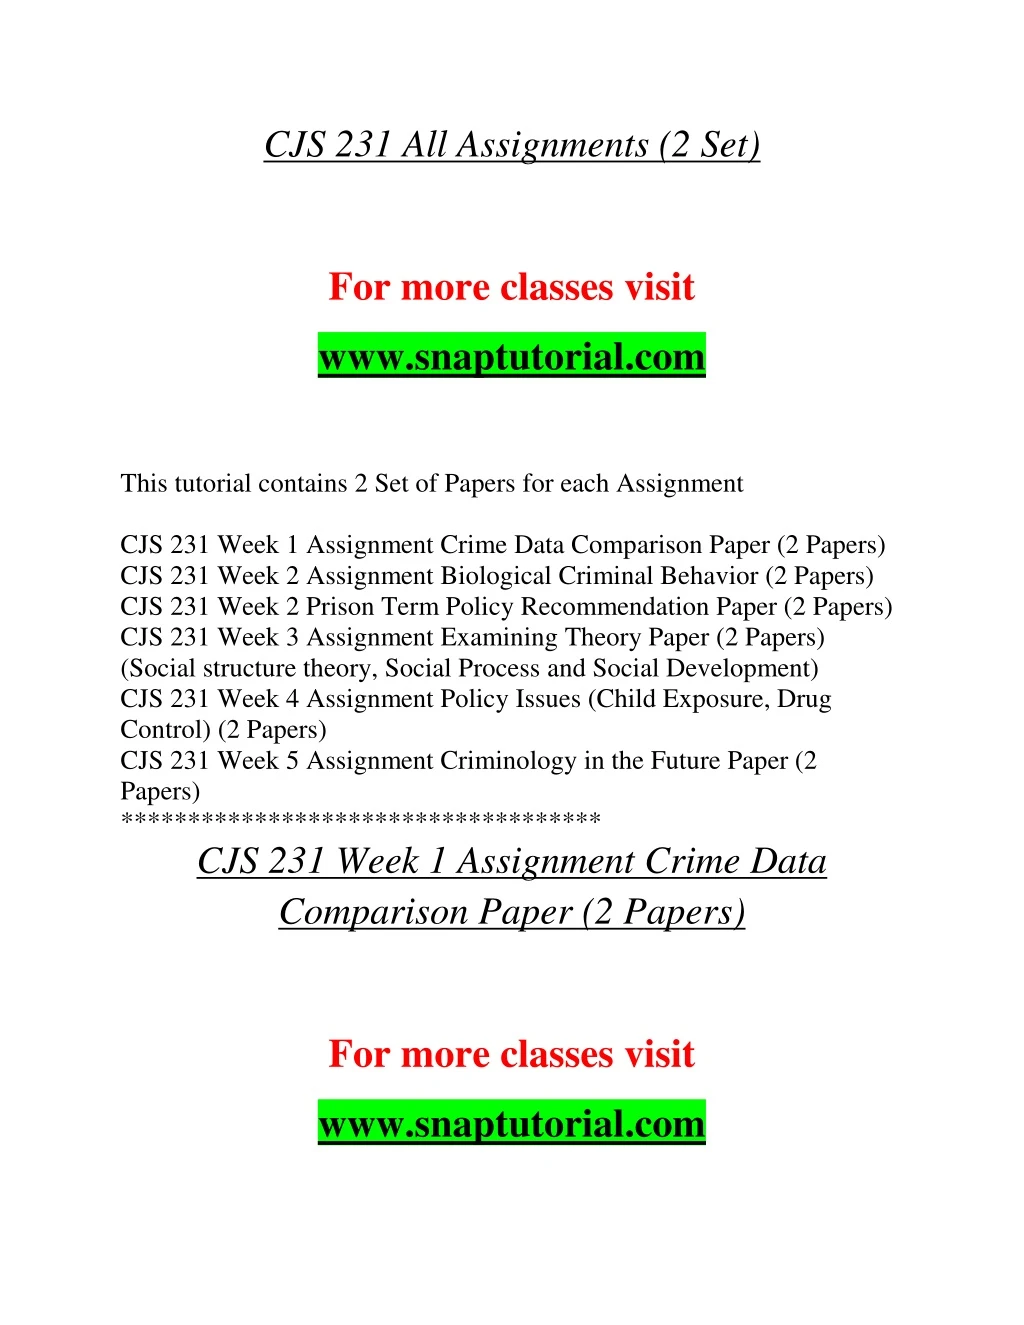 cjs 231 all assignments 2 set